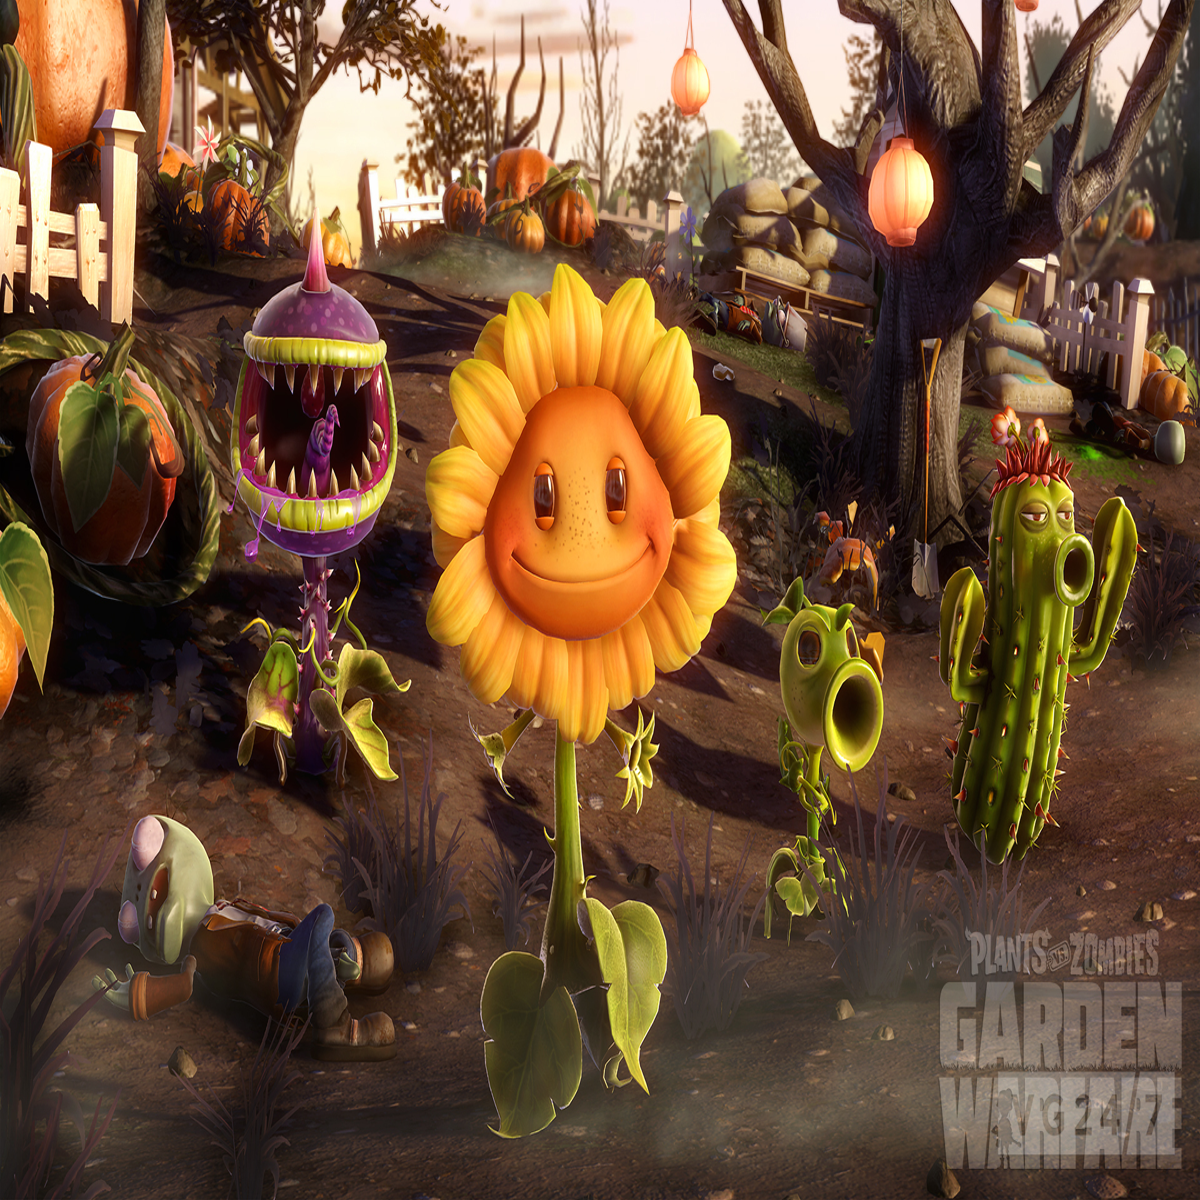 Plants vs. Zombies 2: It's About Time - Gamereactor UK